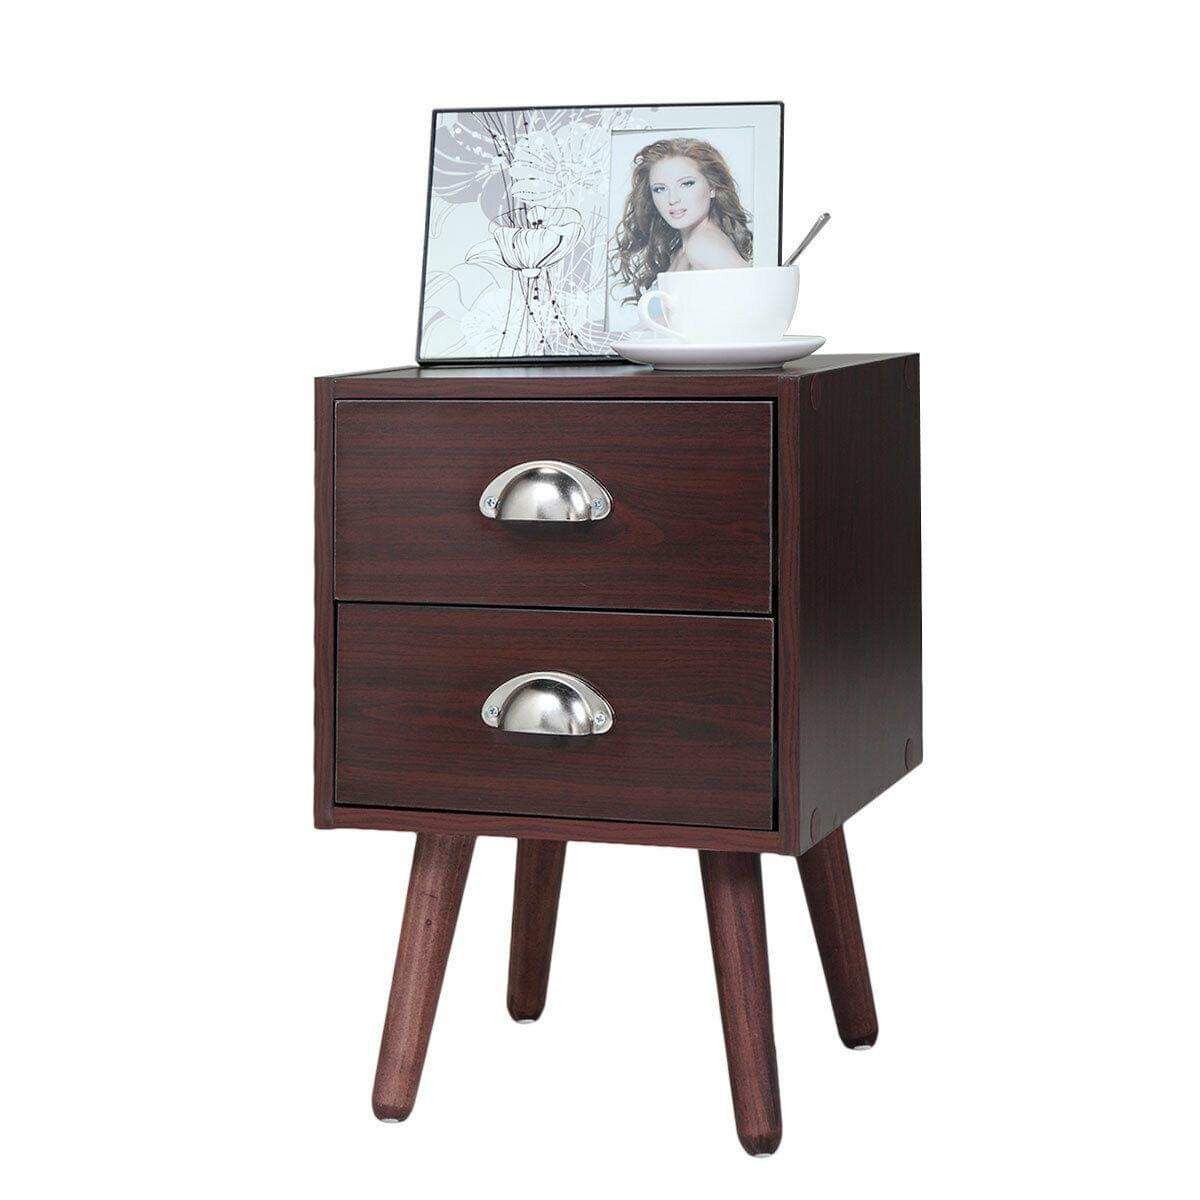 NEW Brown 2 Drawer Bedside Table